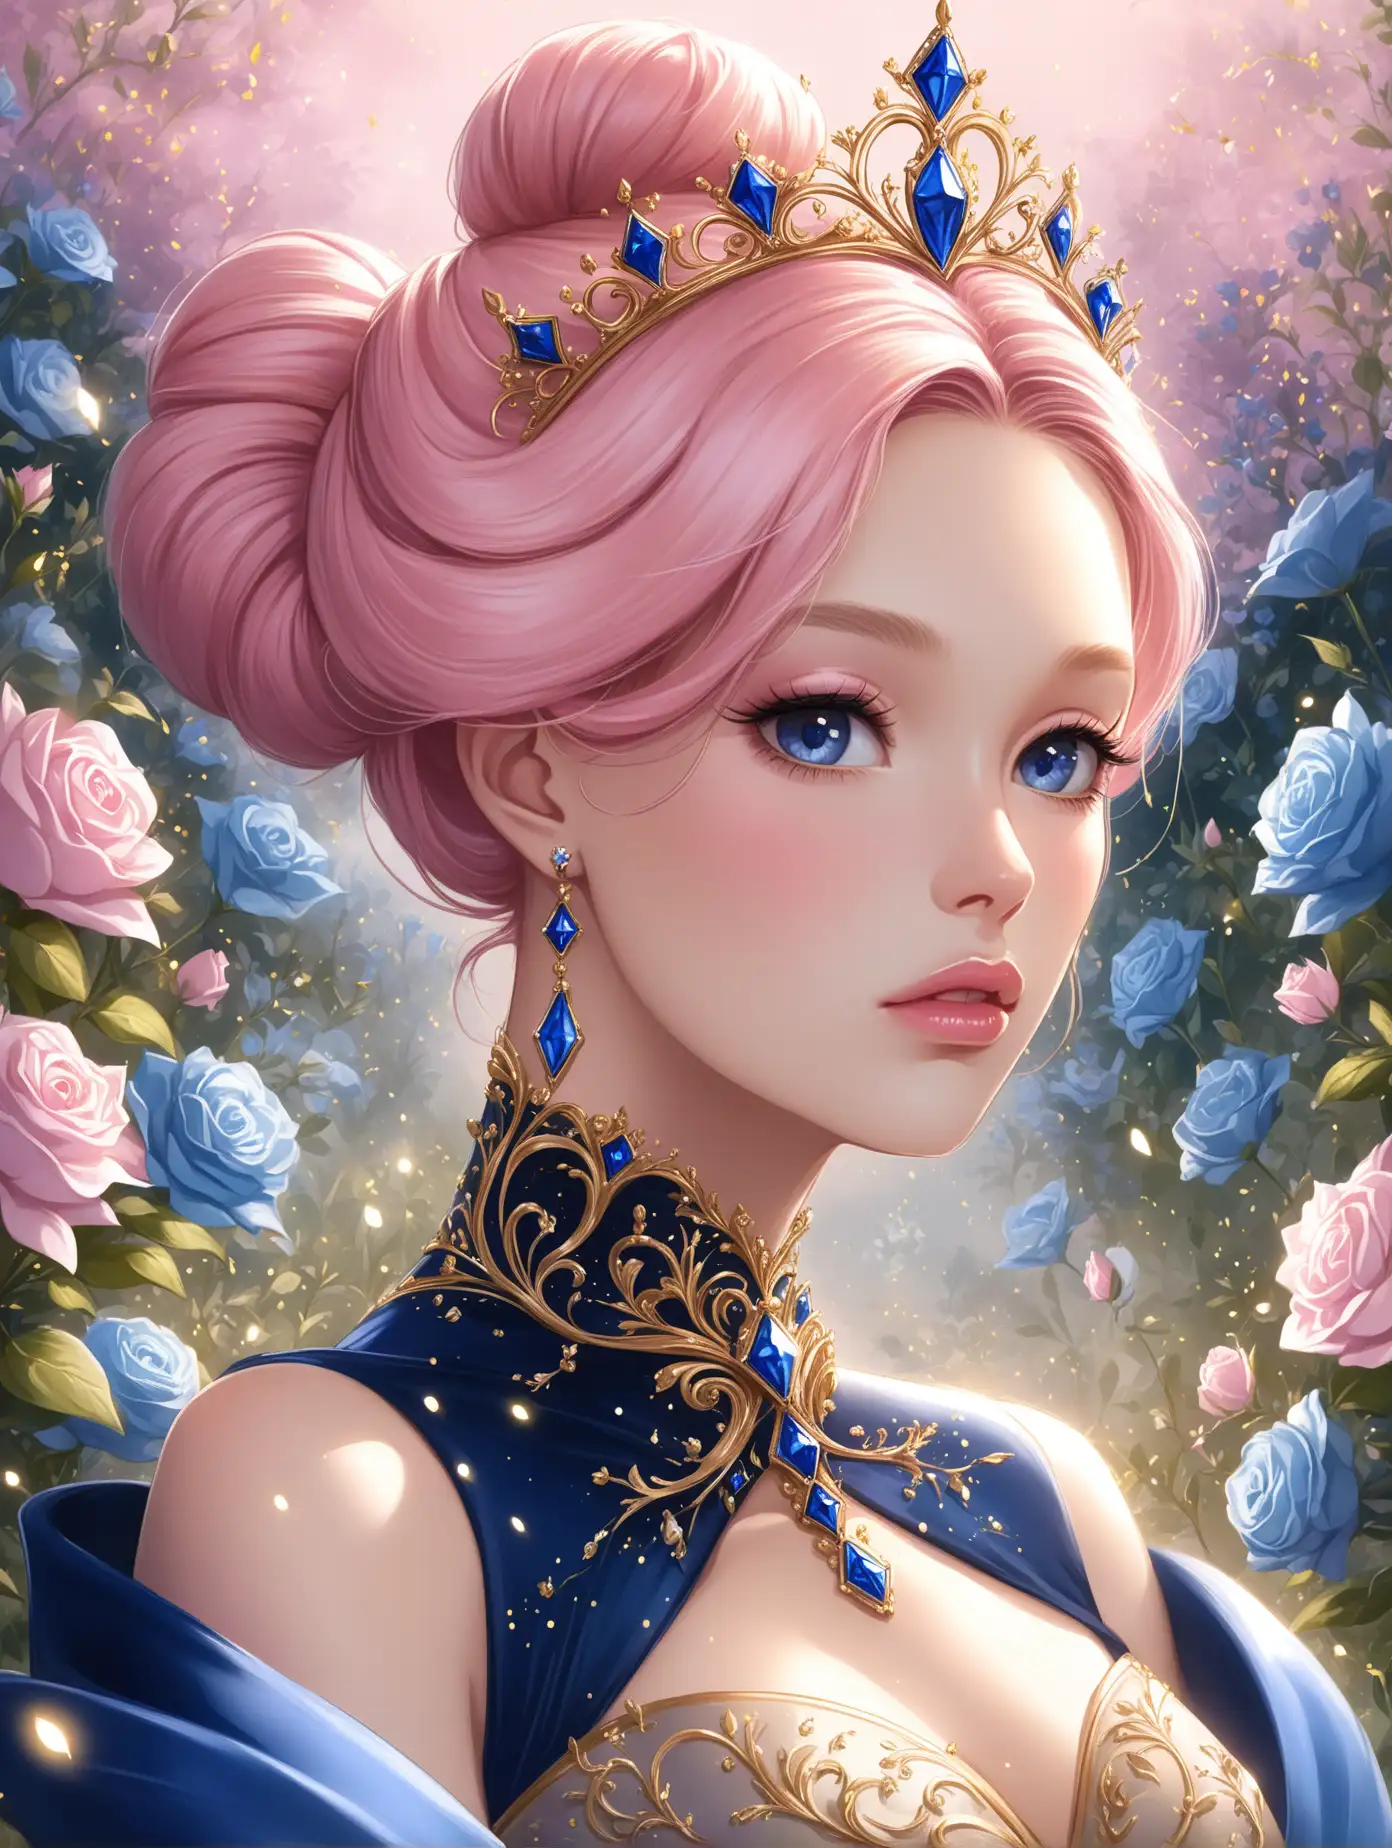 Illustration of a beautiful princesswoman, sexy, , full lips,  pink hair up in a sleek bun , tiara, navy blue and gold princess gown, she's in a garden, white and blue flowers, pink fog, gold sparks, cinched waist, close up 